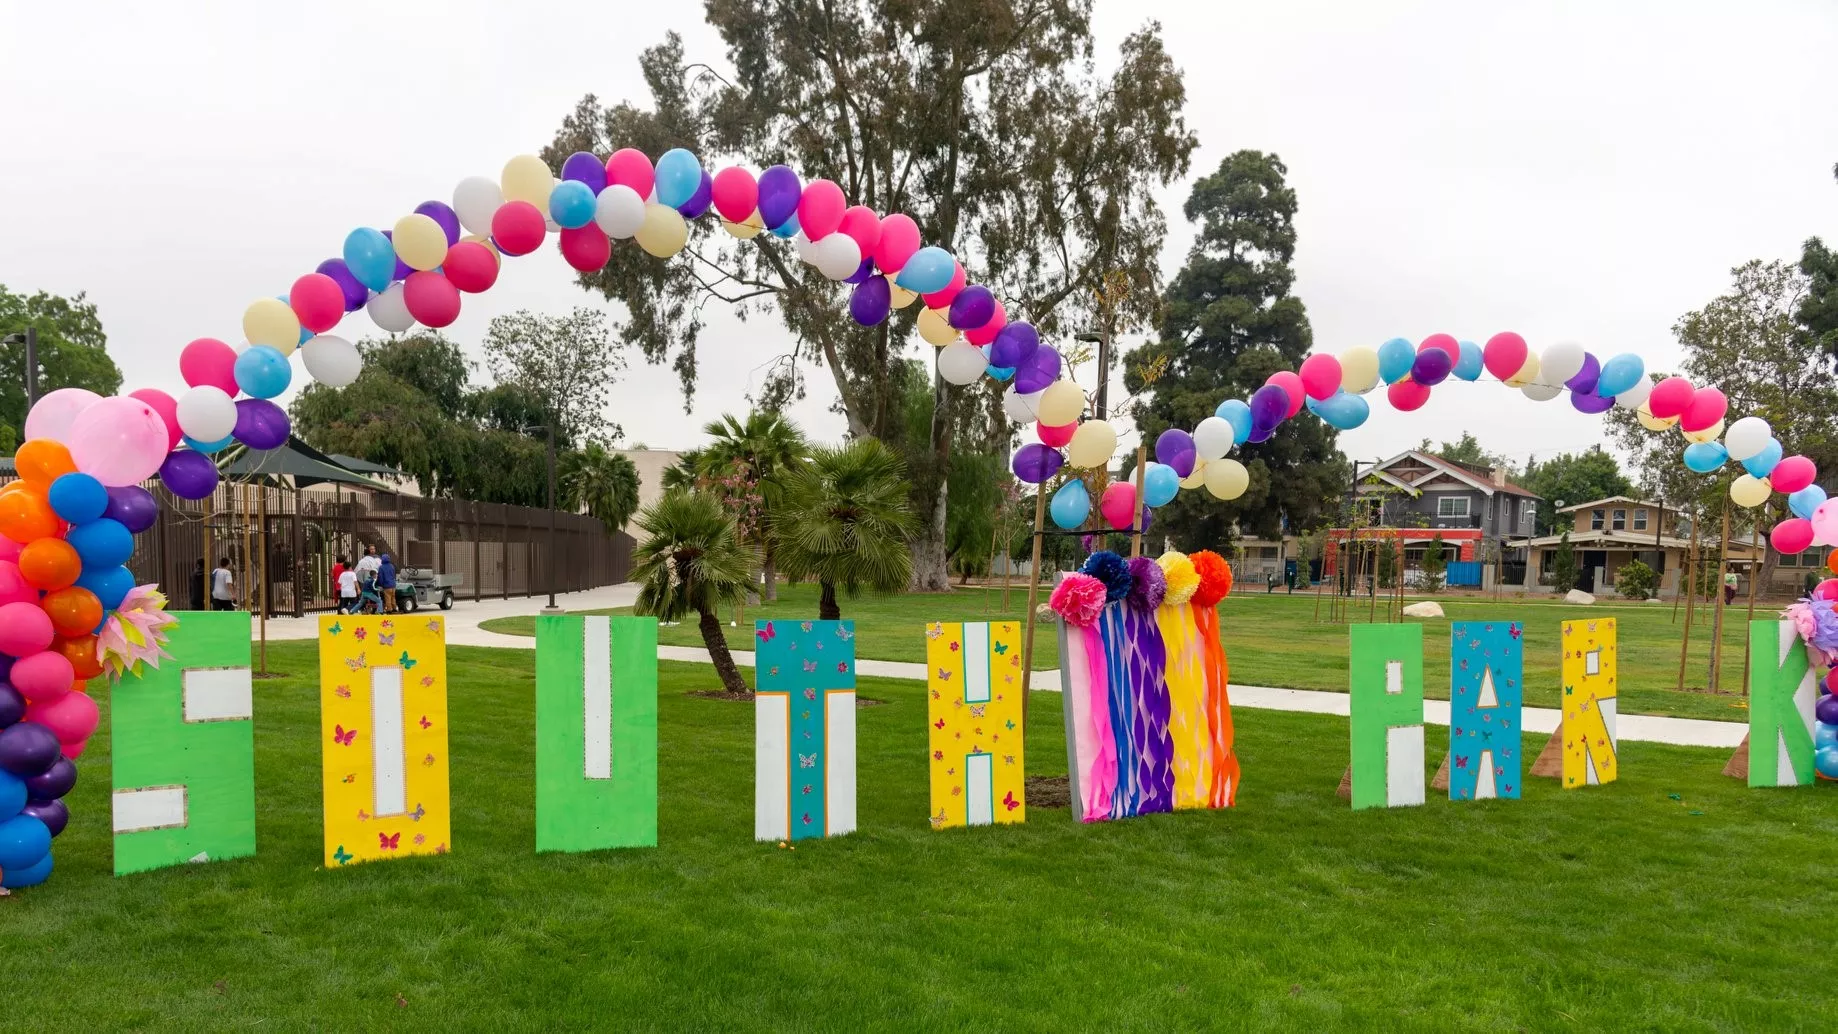 Field picture of a South Park sign and balloon arches